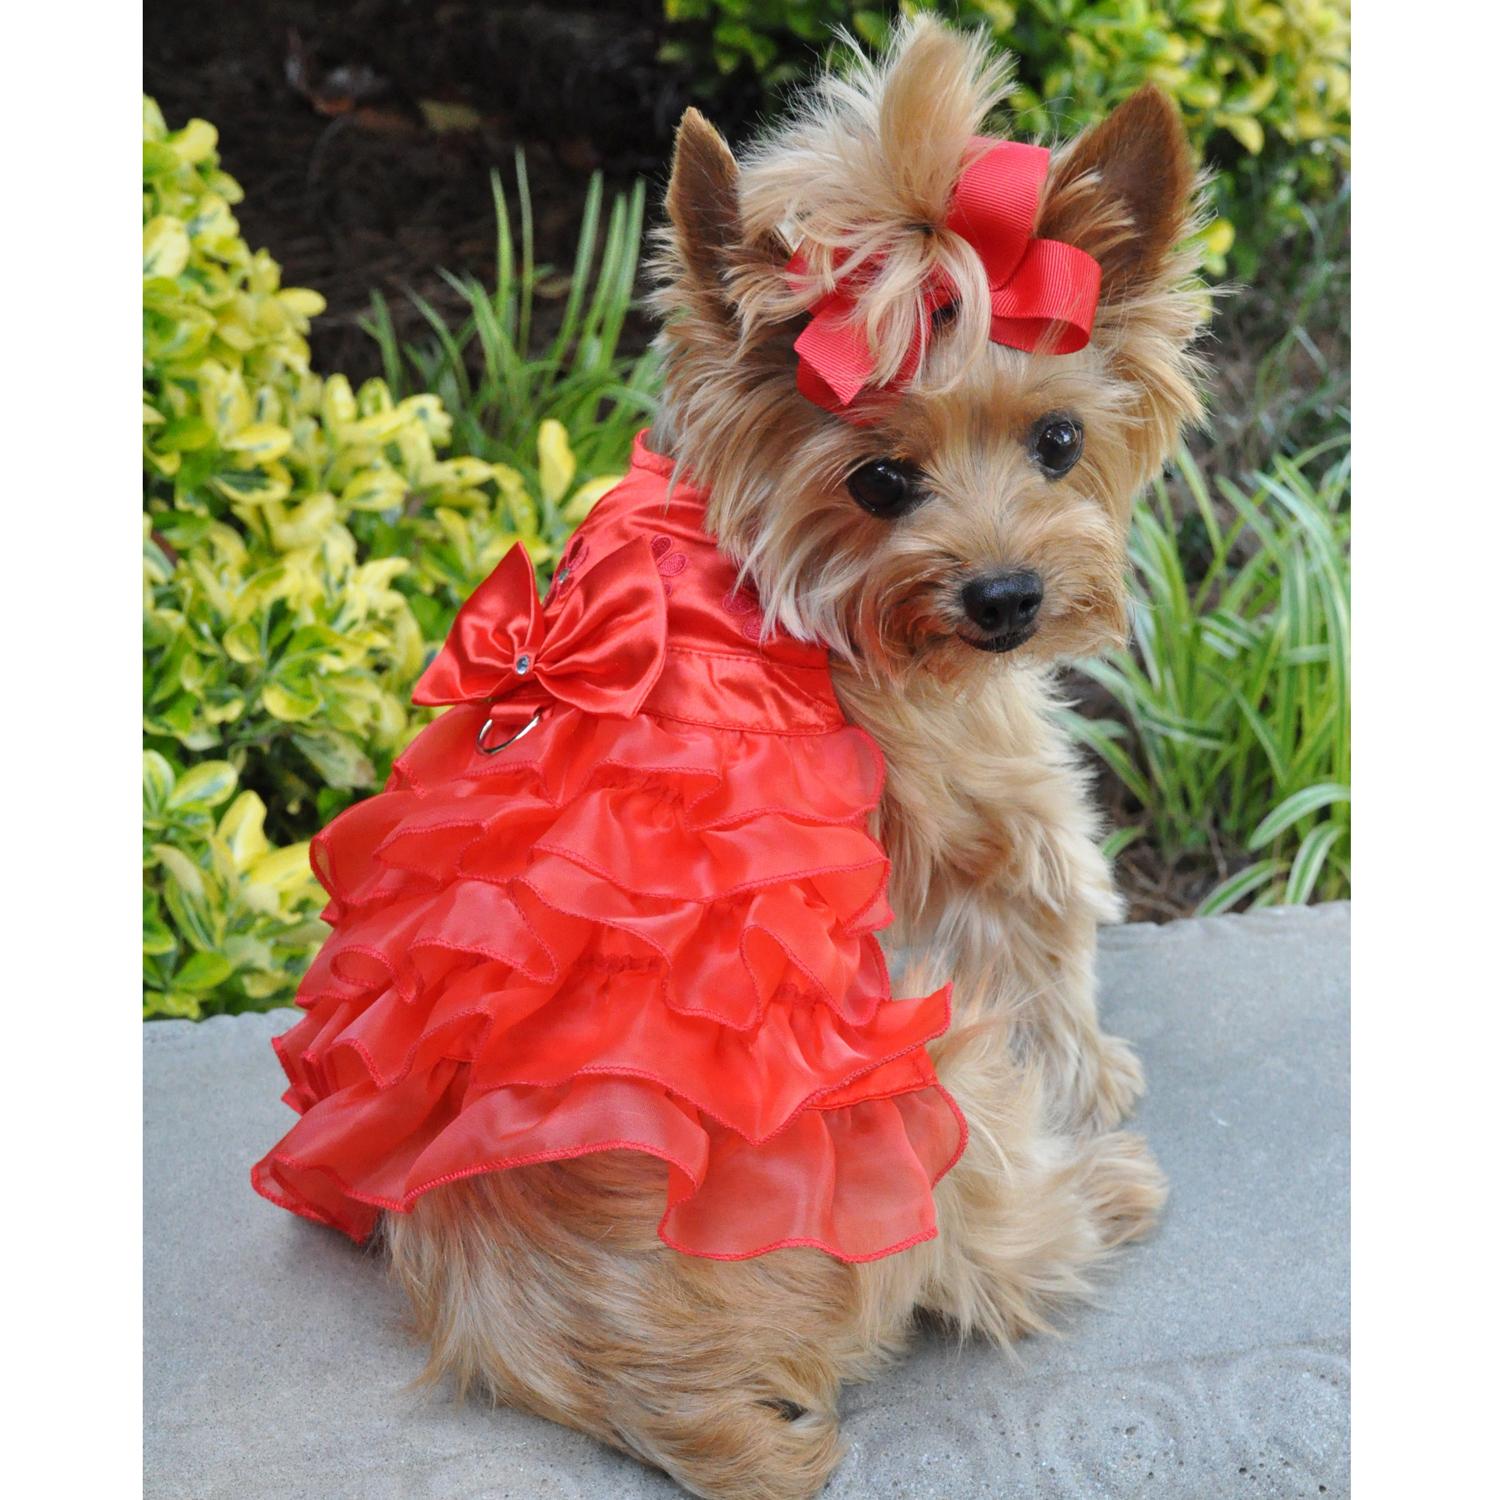 Holiday Dog Harness Dress by Doggie Design - Red Satin